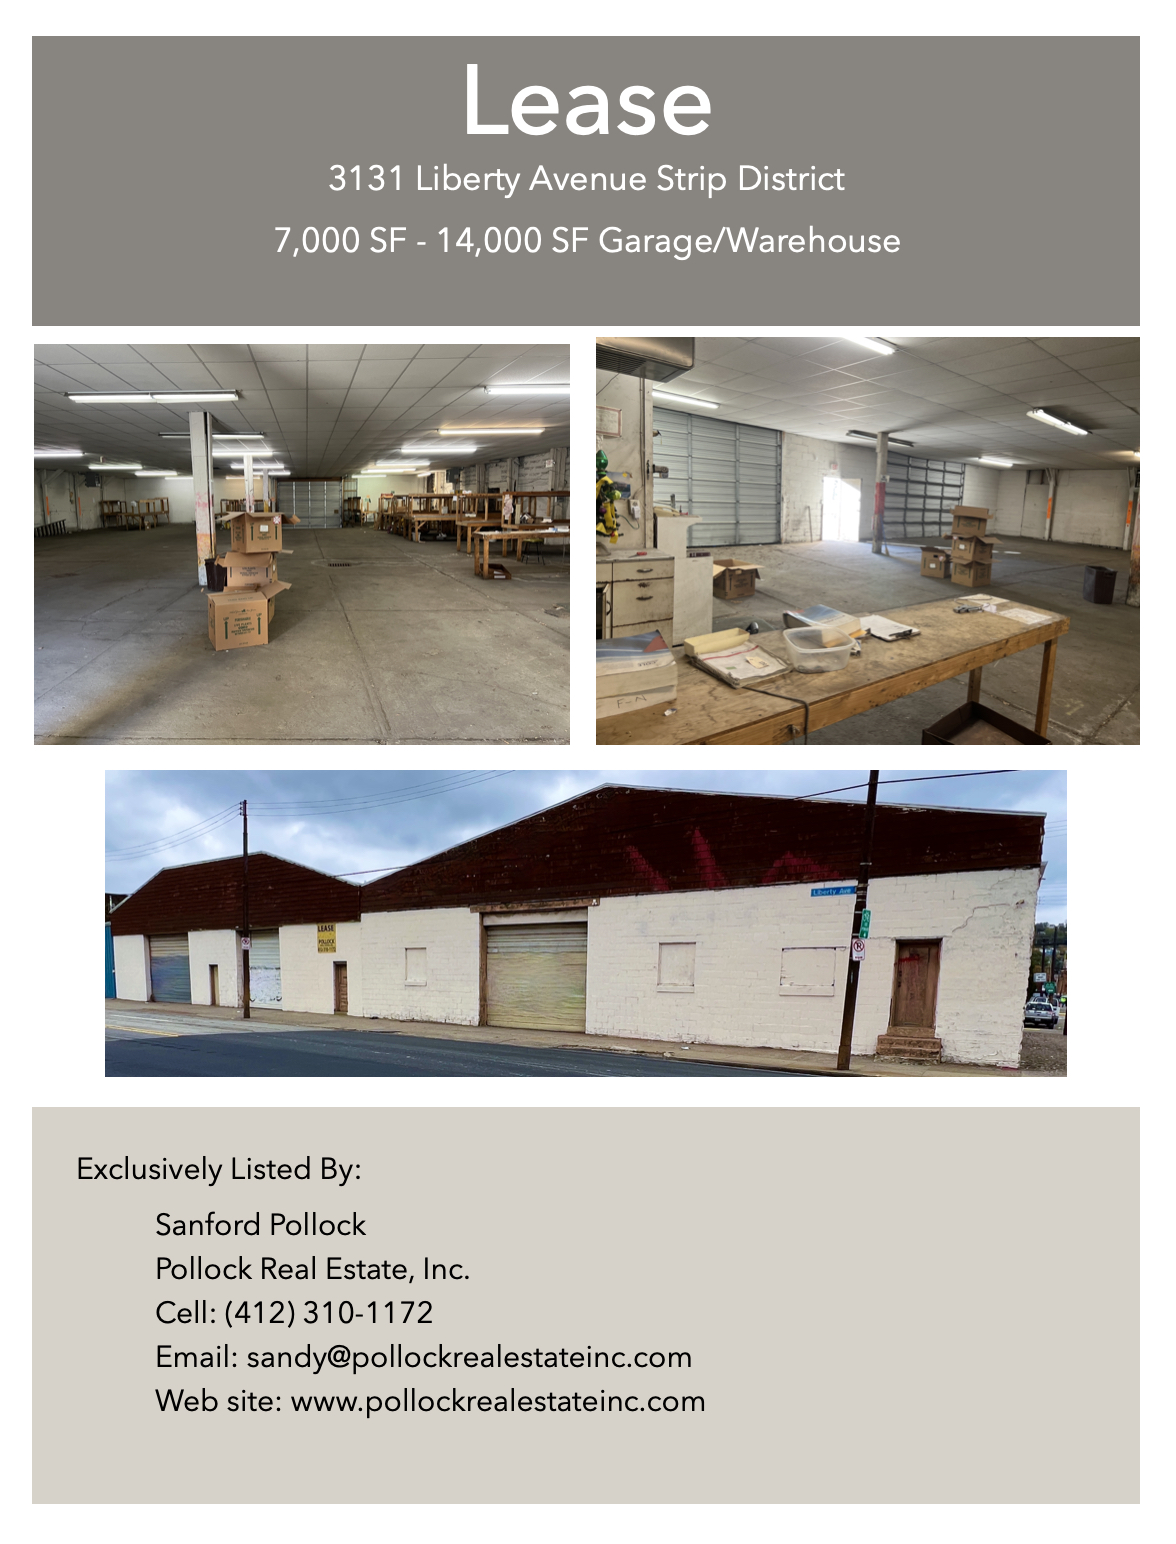 Strip District Warehouse Lease  - Strip District Warehouse for lease 7000 or 14000 SF Drive-in, Drive-through  www.sanford...